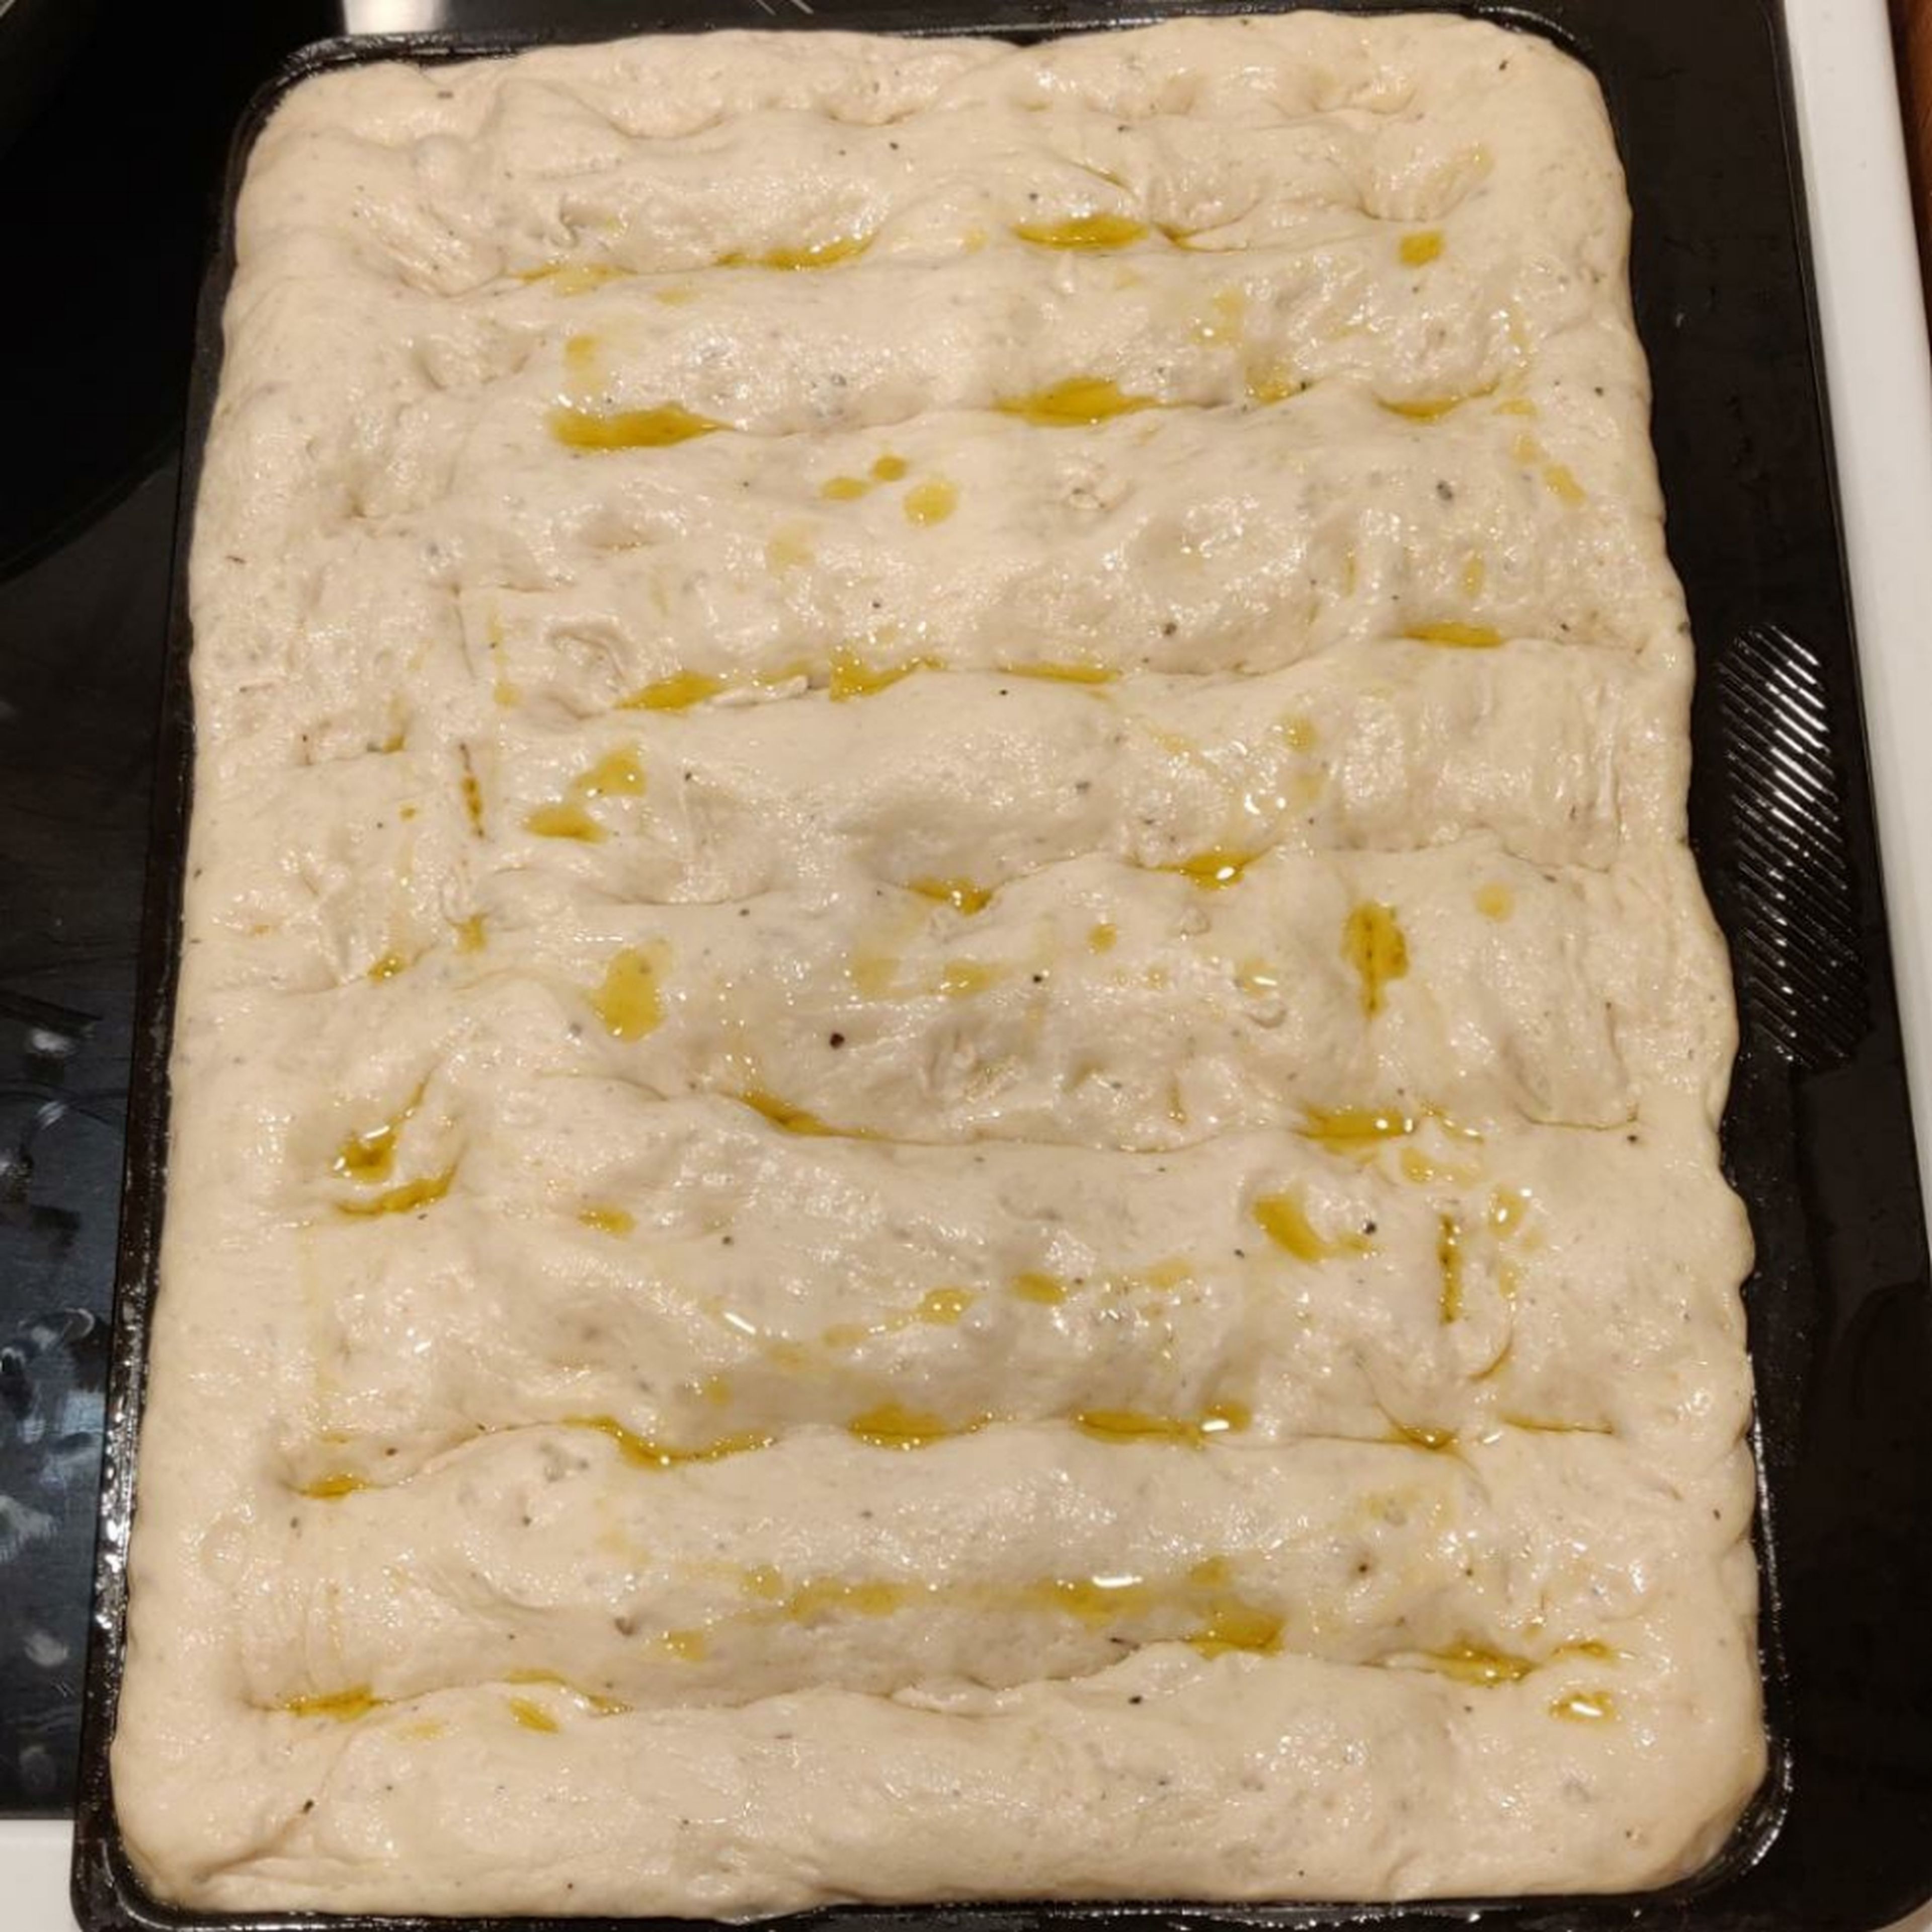 remove the plastic wrap and add the rosemary sprigs on top of the focaccia. you could use garlic, pepper corns, seeds, fennel, sundried tomatoes, etc, for this. drizzle extra olive oil over the top of the focaccia.